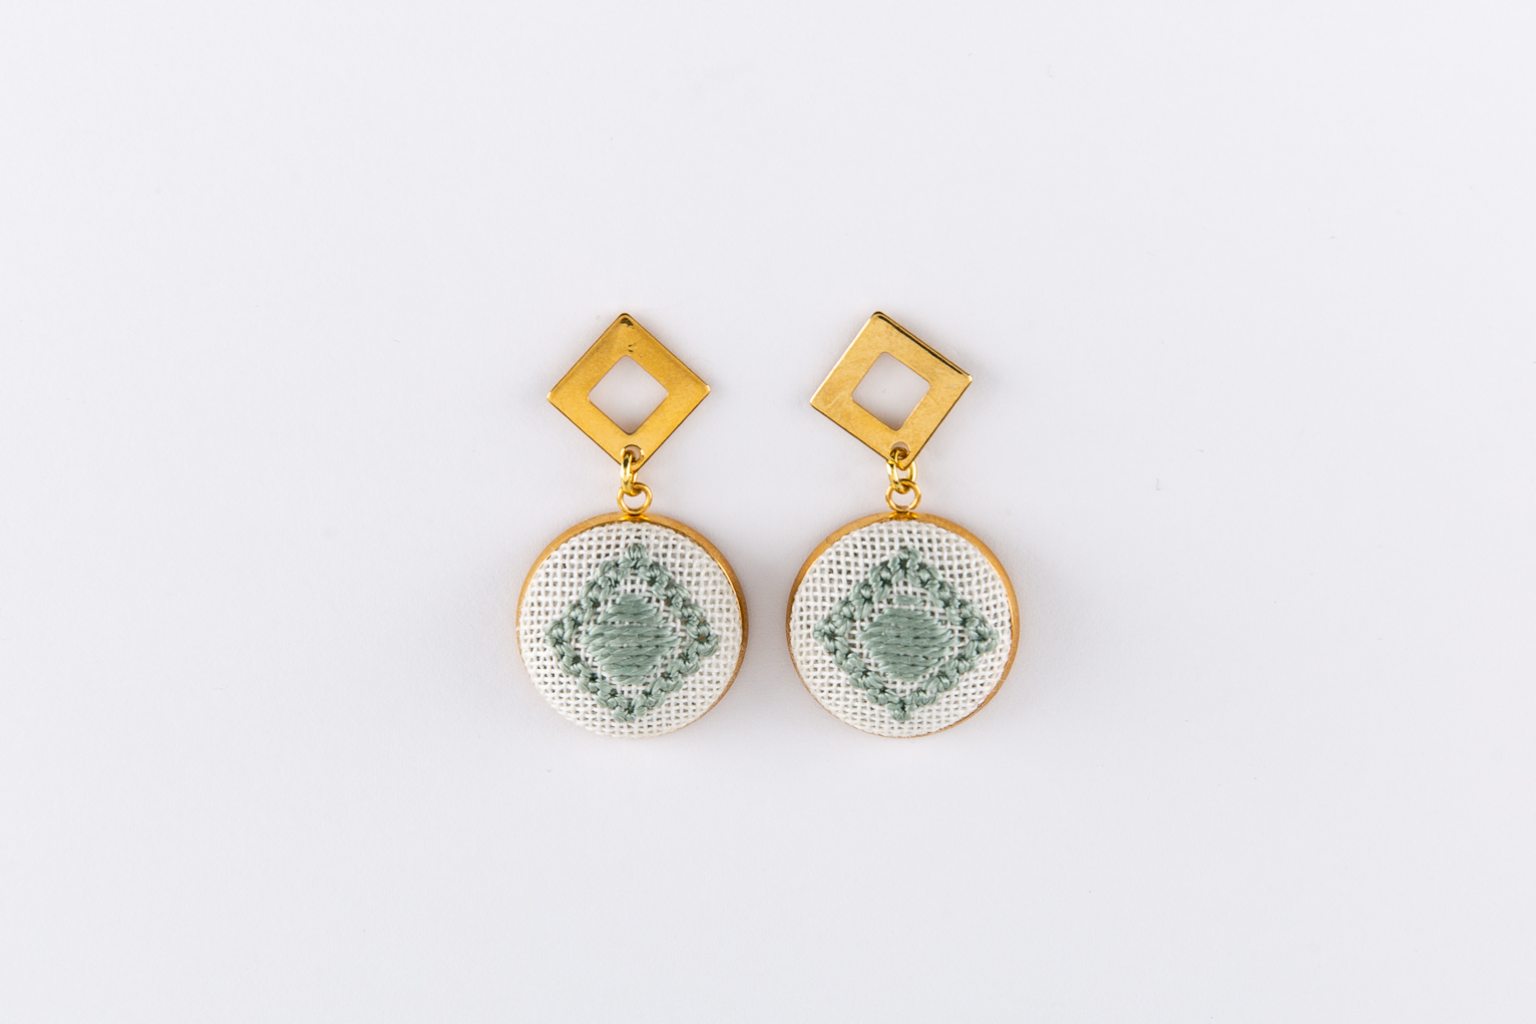 Green hand-embroidered earrings